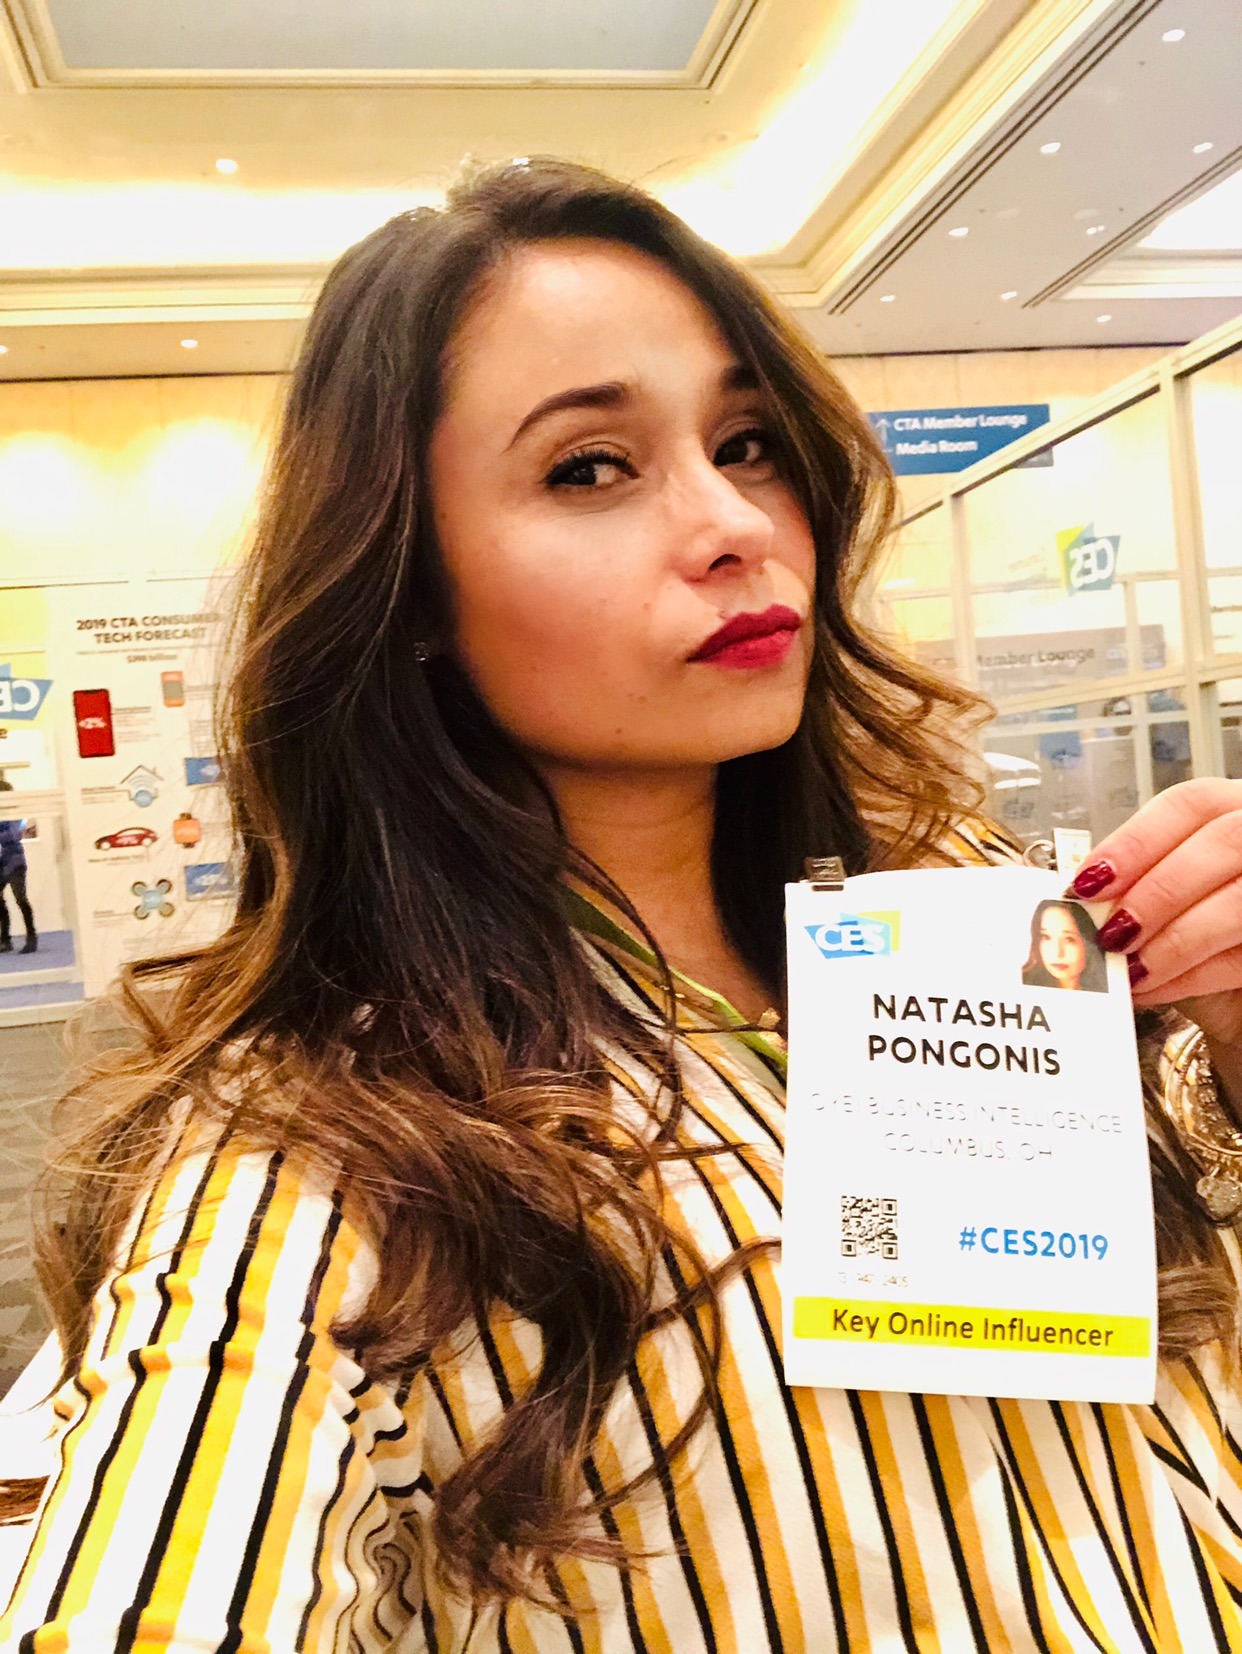 CES 2019: Innovation From a Female Perspective